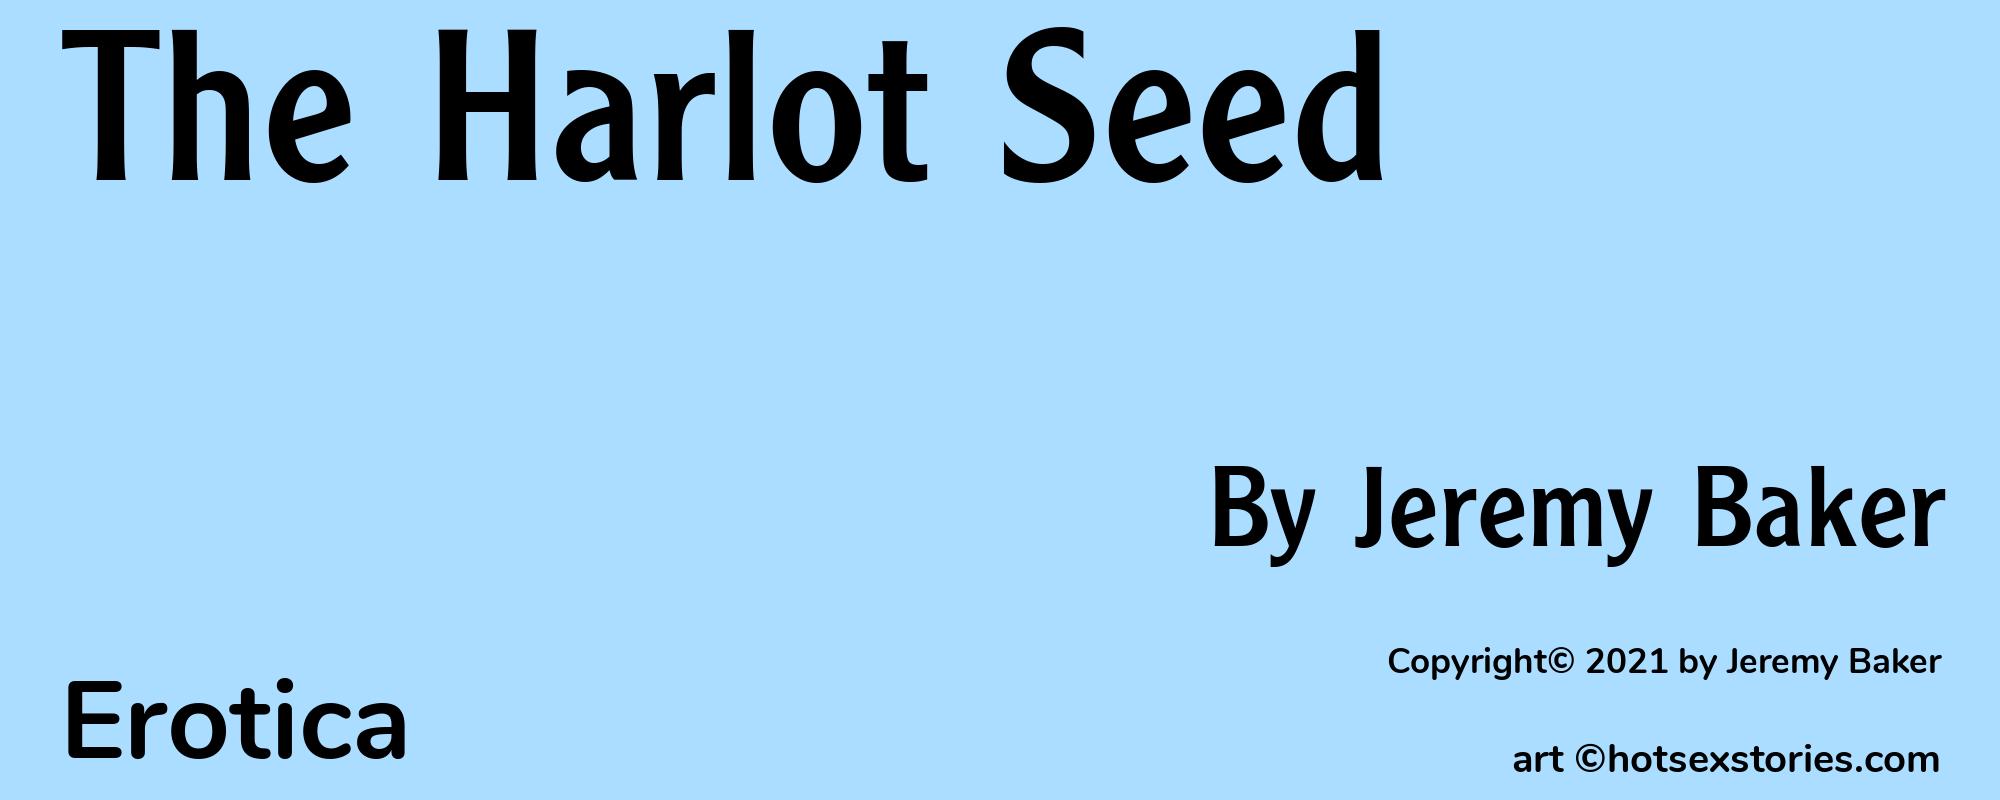 The Harlot Seed - Cover